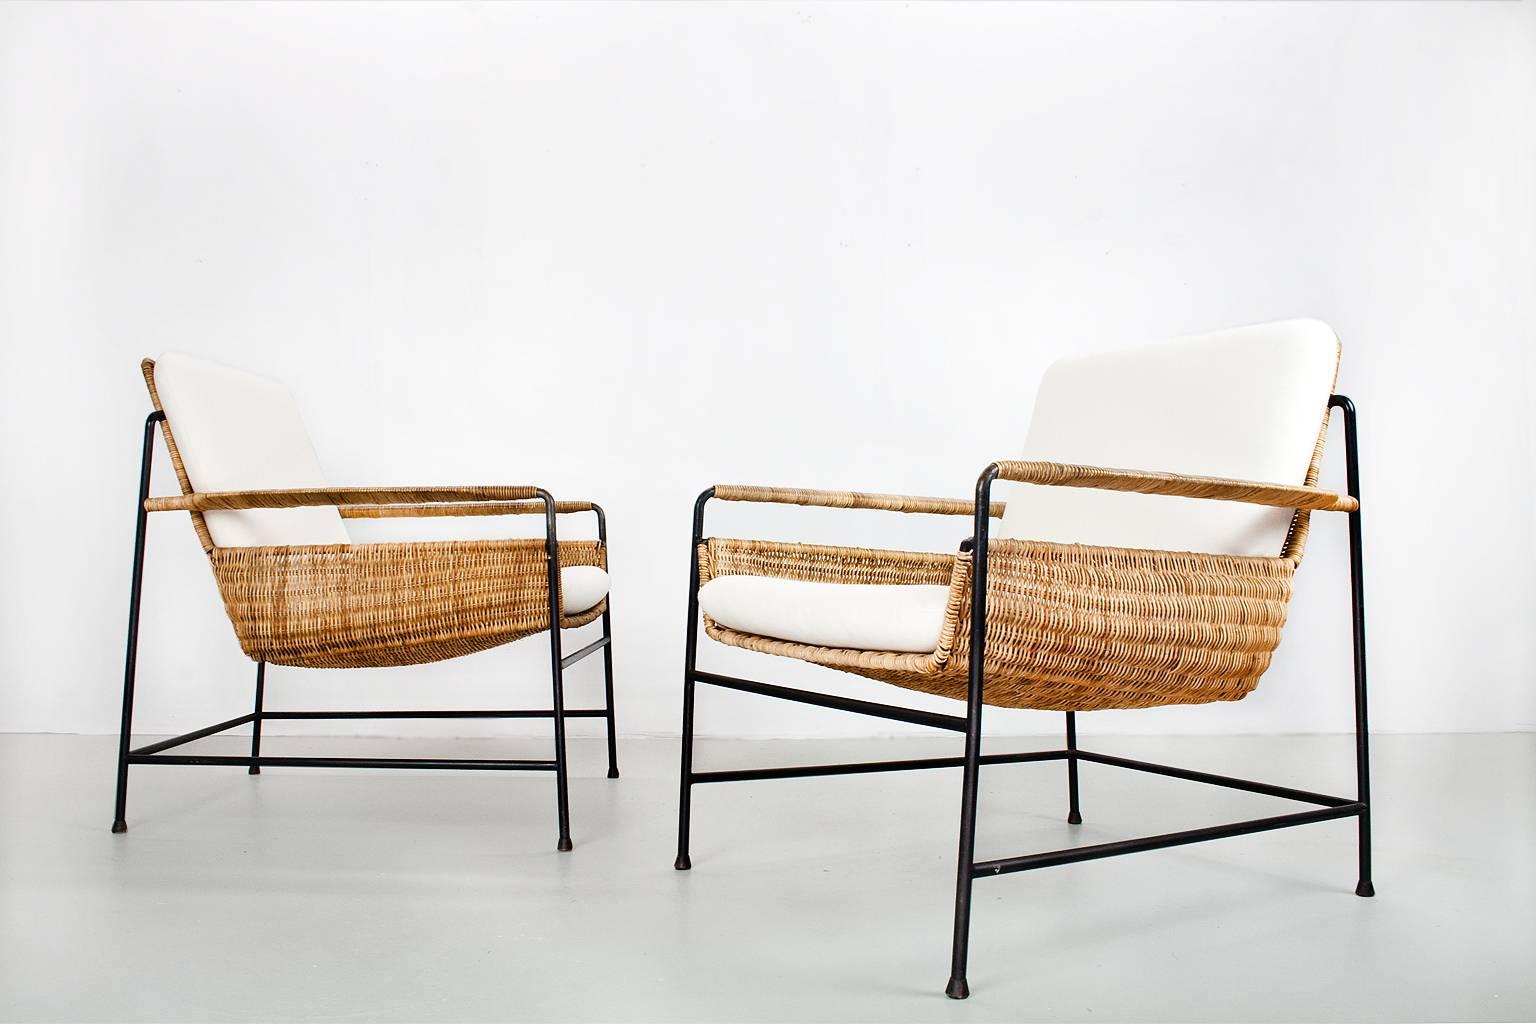 Set of Mid-Century Modern European lounge chairs by Herta Maria Witzemann (1918-1999) for Wilde and Spieth in 1954 Germany. De set has mild and only aesthetic traces of use, the front of the seating has be restored and strengthened with new rattan